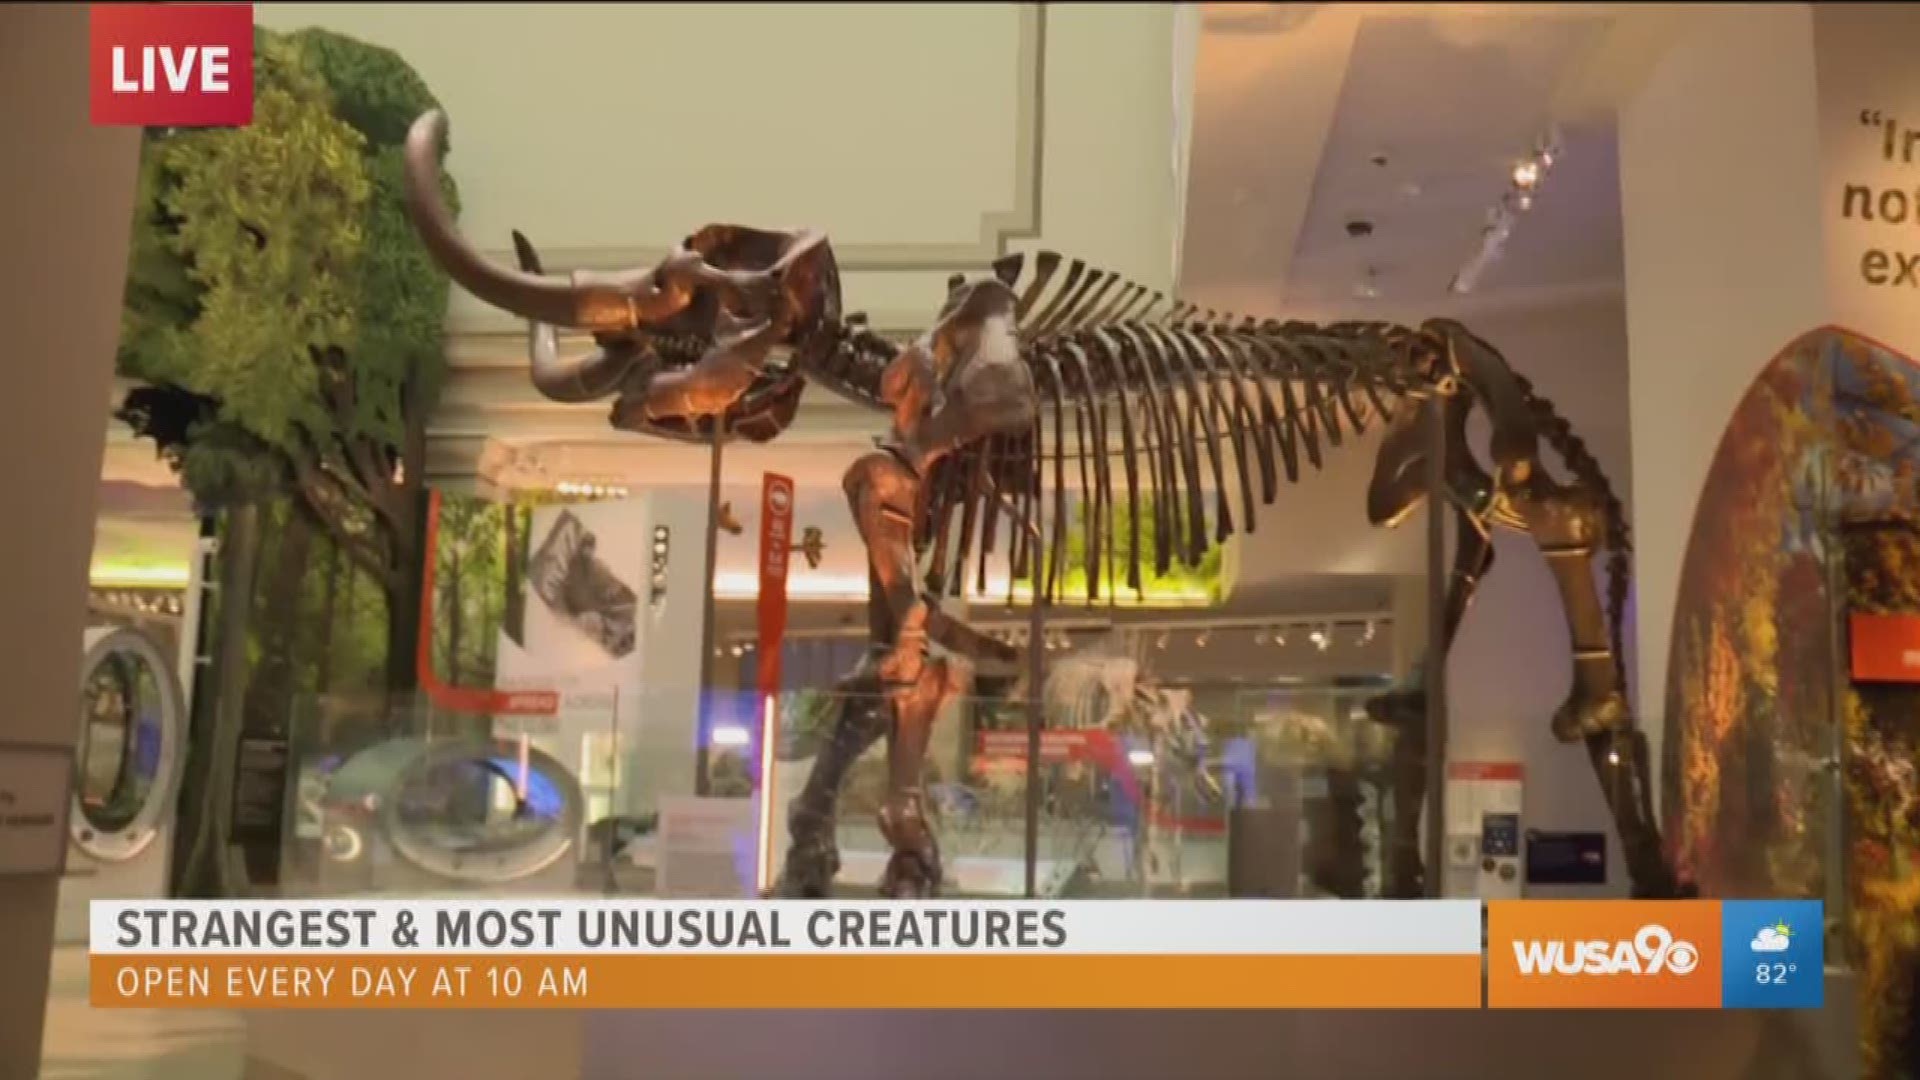 Dr. Hans Sues talks about the new dinosaur hall at the National Museum of Natural History. The exhibit features a variety of dinosaur species and other creatures that once roamed the Earth. Visit the exhibit any day of the week at 10 a.m.